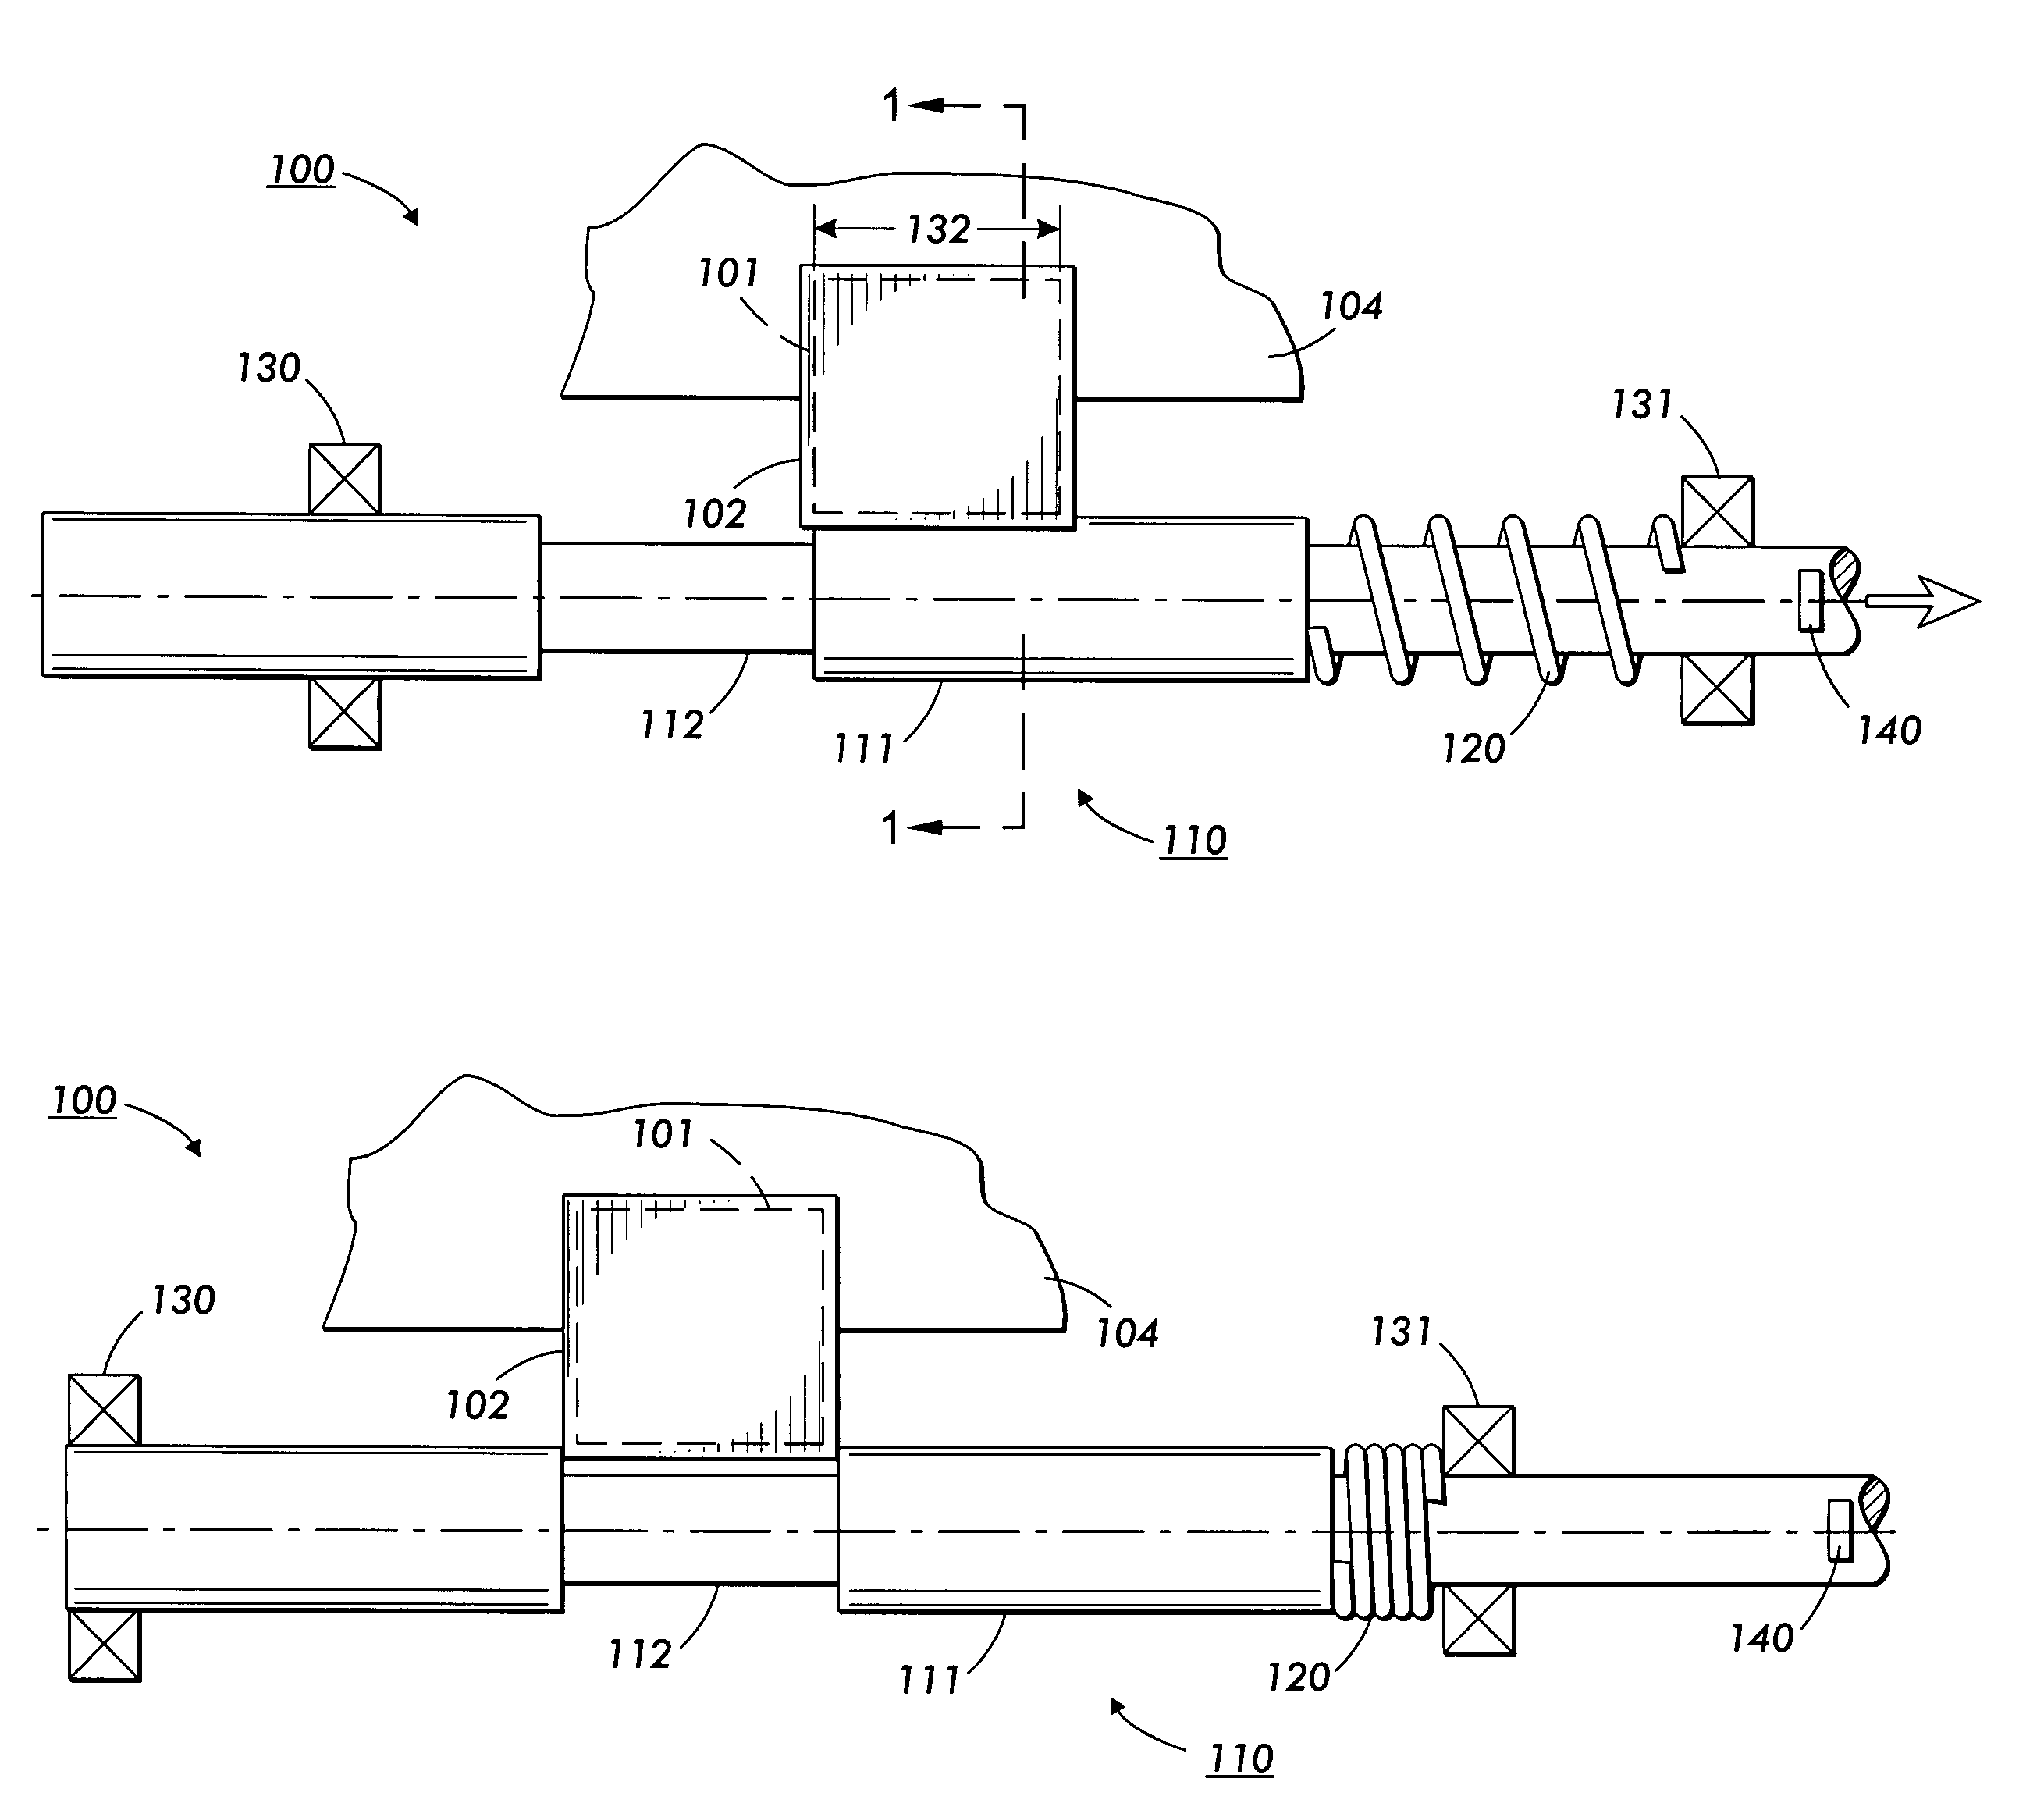 Magnetic latch and release apparatus